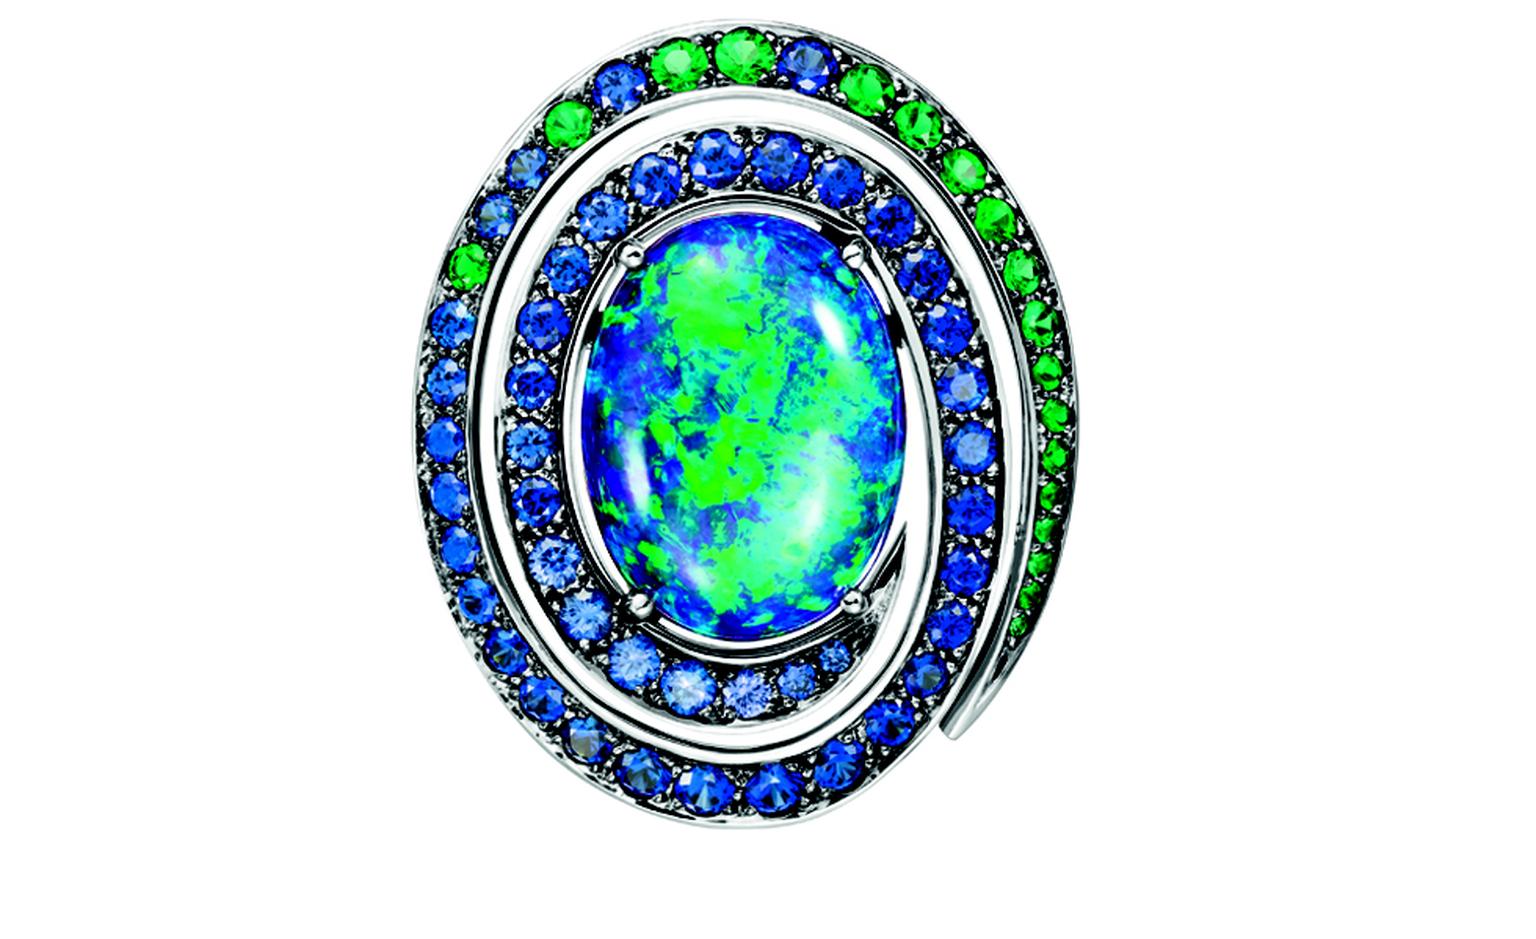 BOUCHERON. Aiguebelle earrings, set with an oval opal cabochon, paved with emeralds, blue and purple sapphires, on white gold. POA